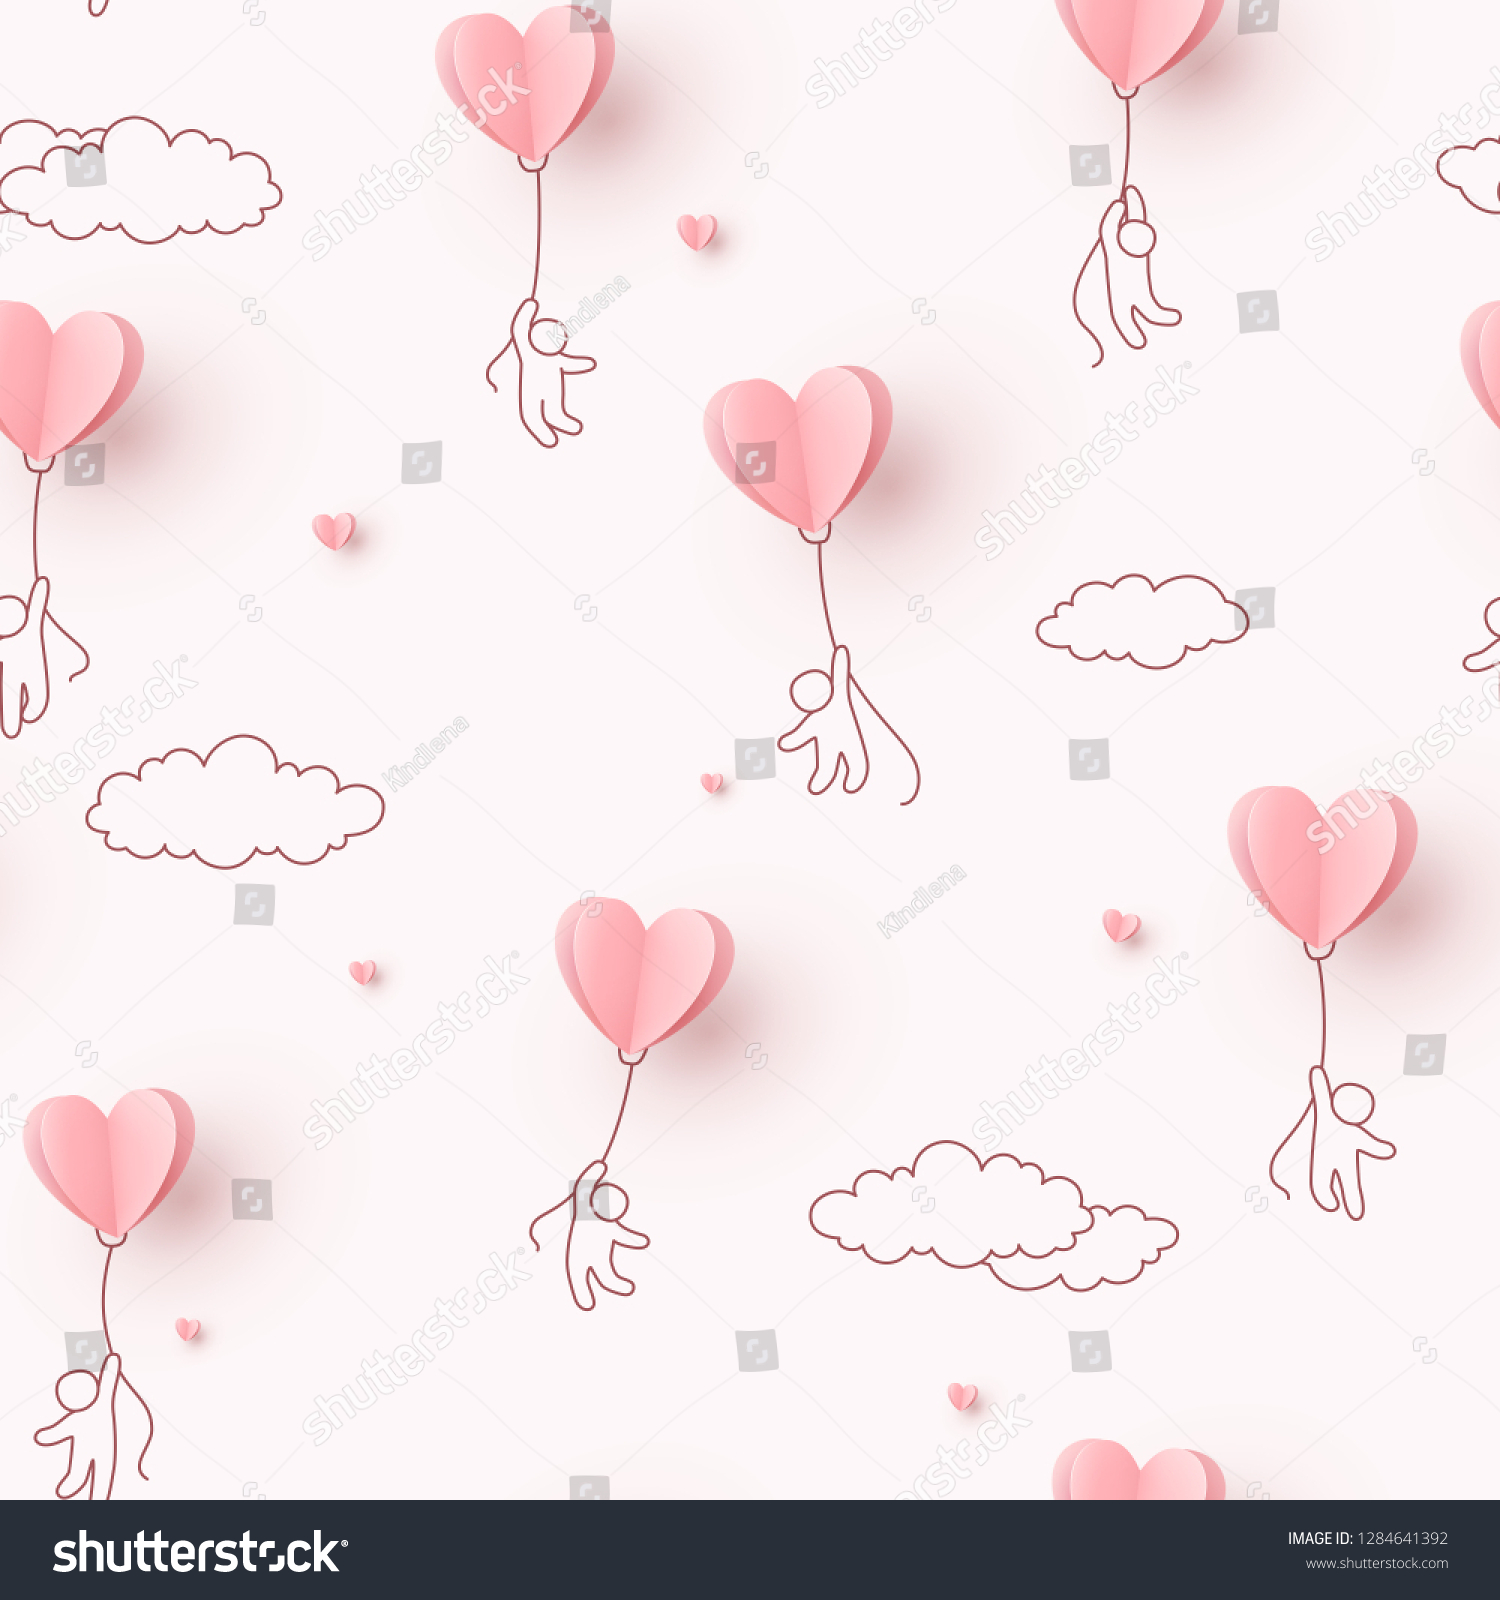 Valentines hearts balloons with people flying on pink sky background. Vector love seamless patern for Happy Mother's or Valentine's Day greeting card design.
 #1284641392